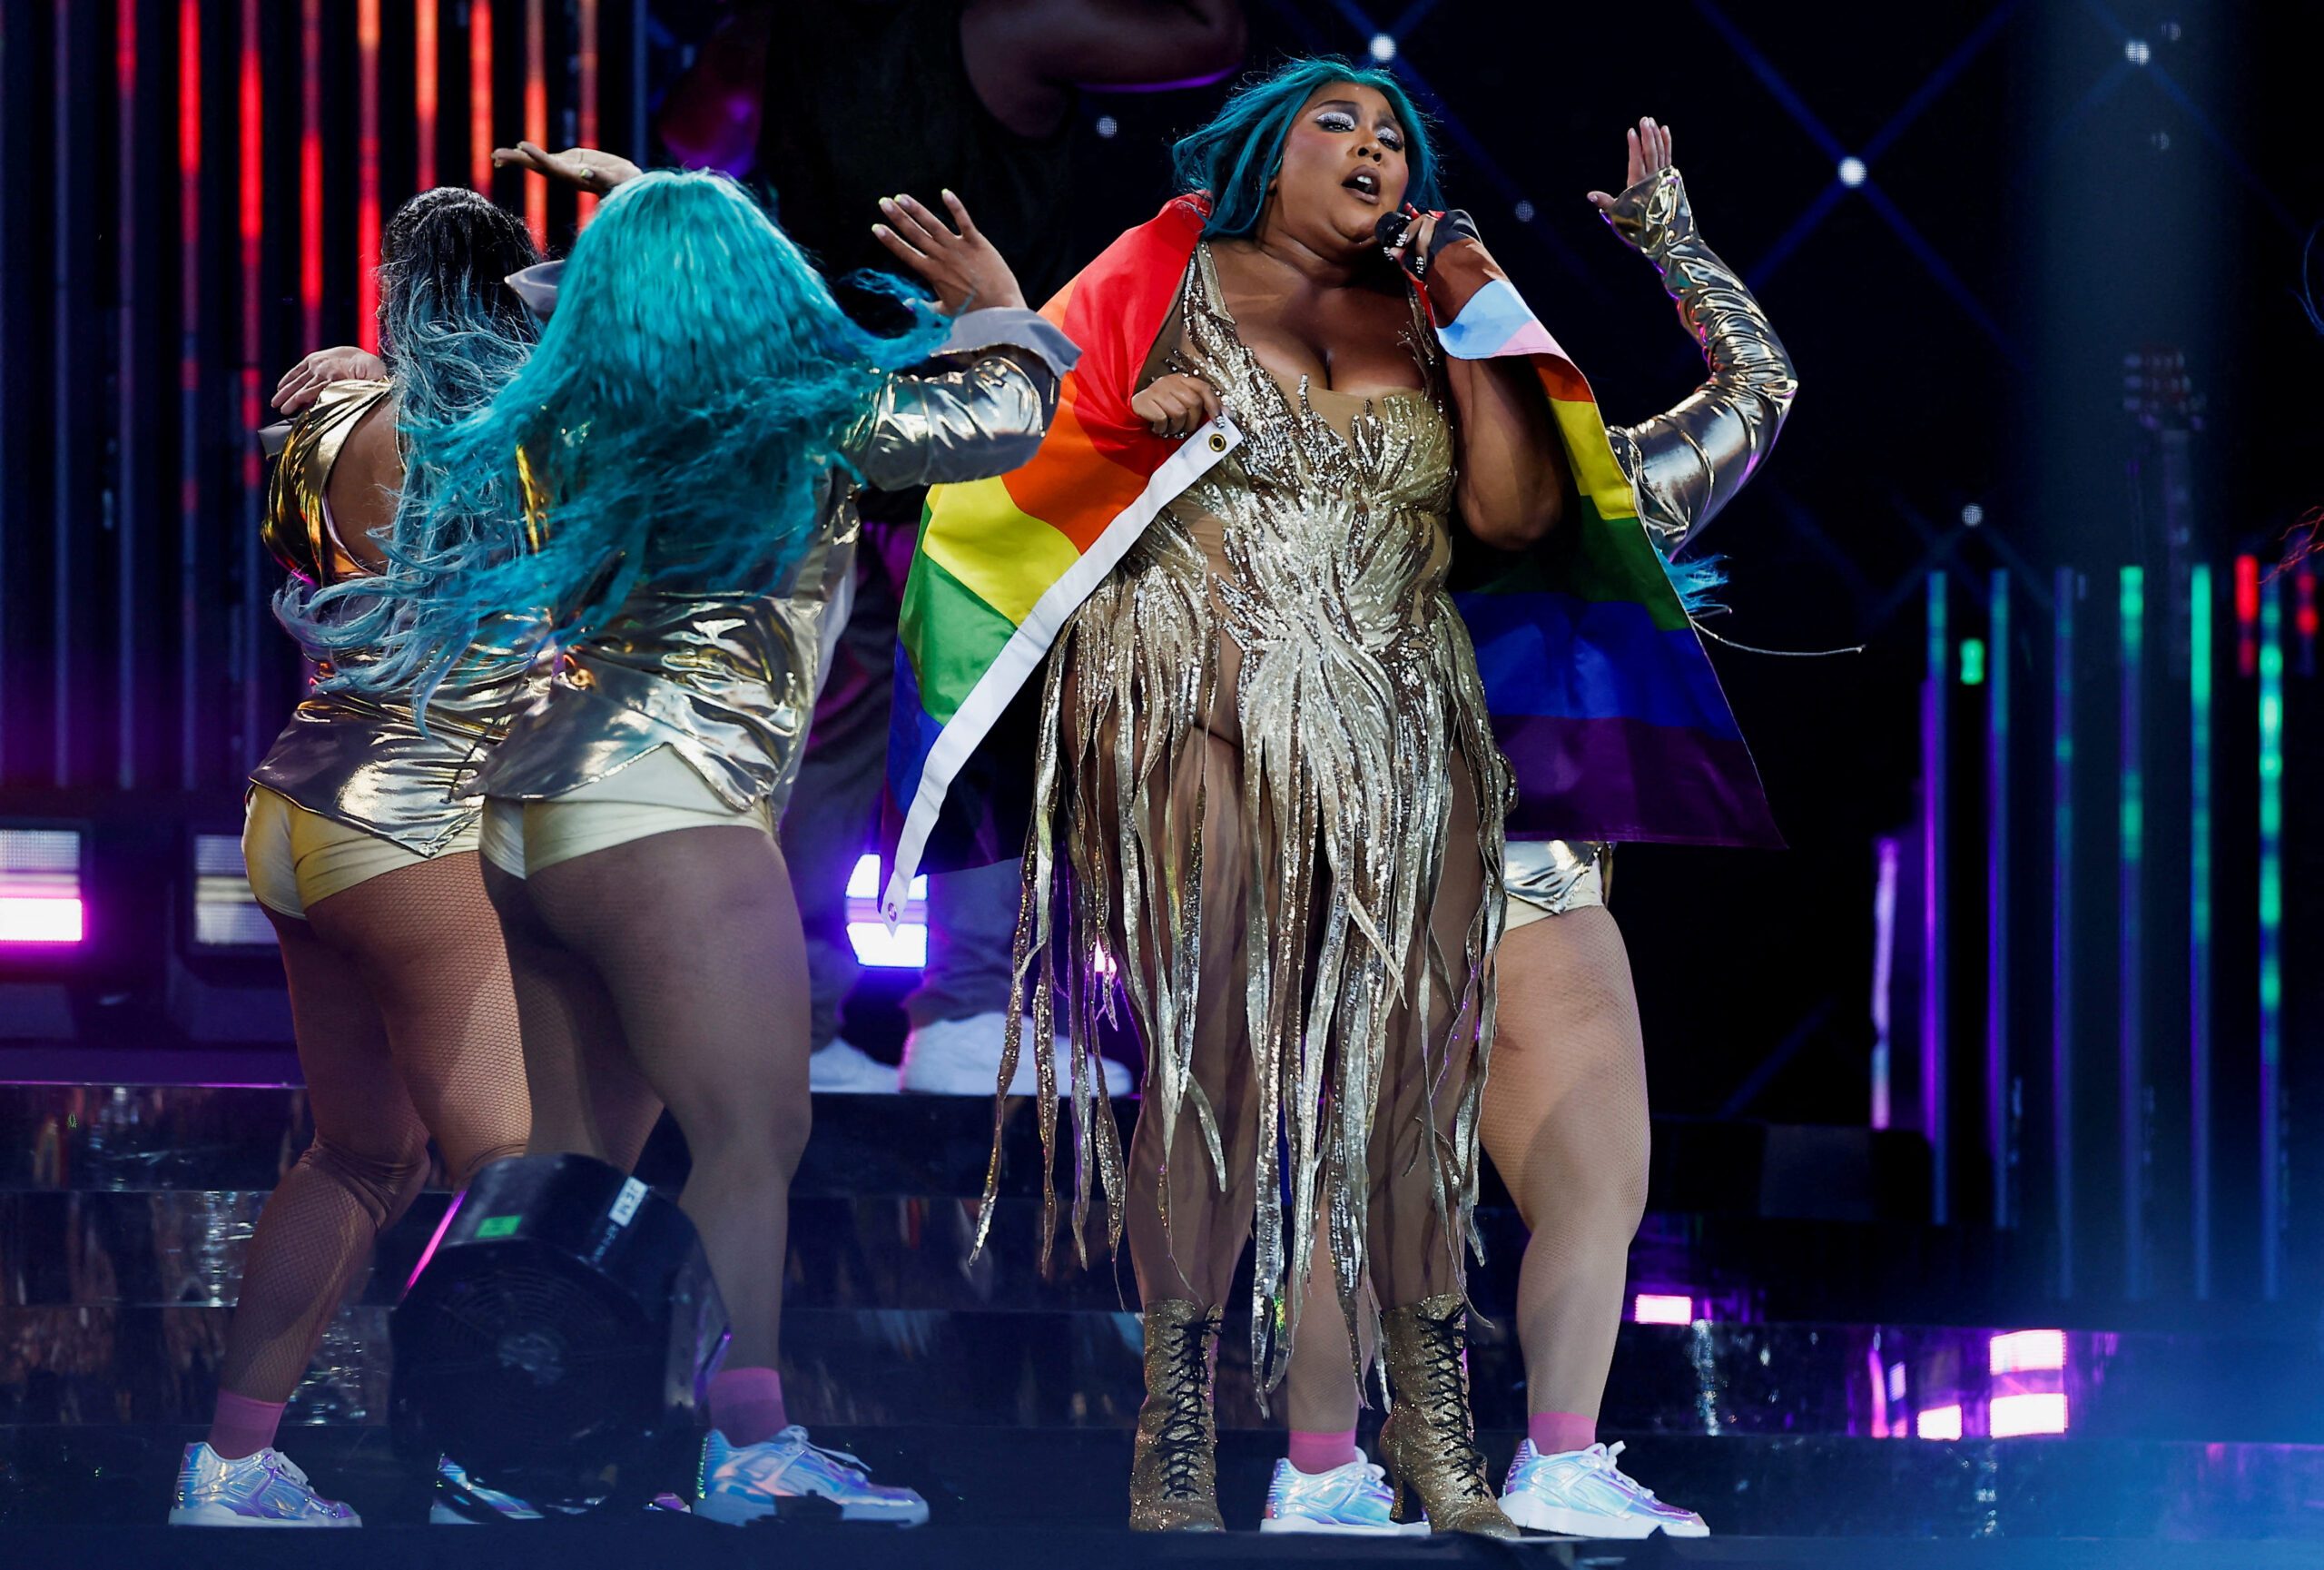 Lizzo sued by former dancers, accused of creating hostile work environment